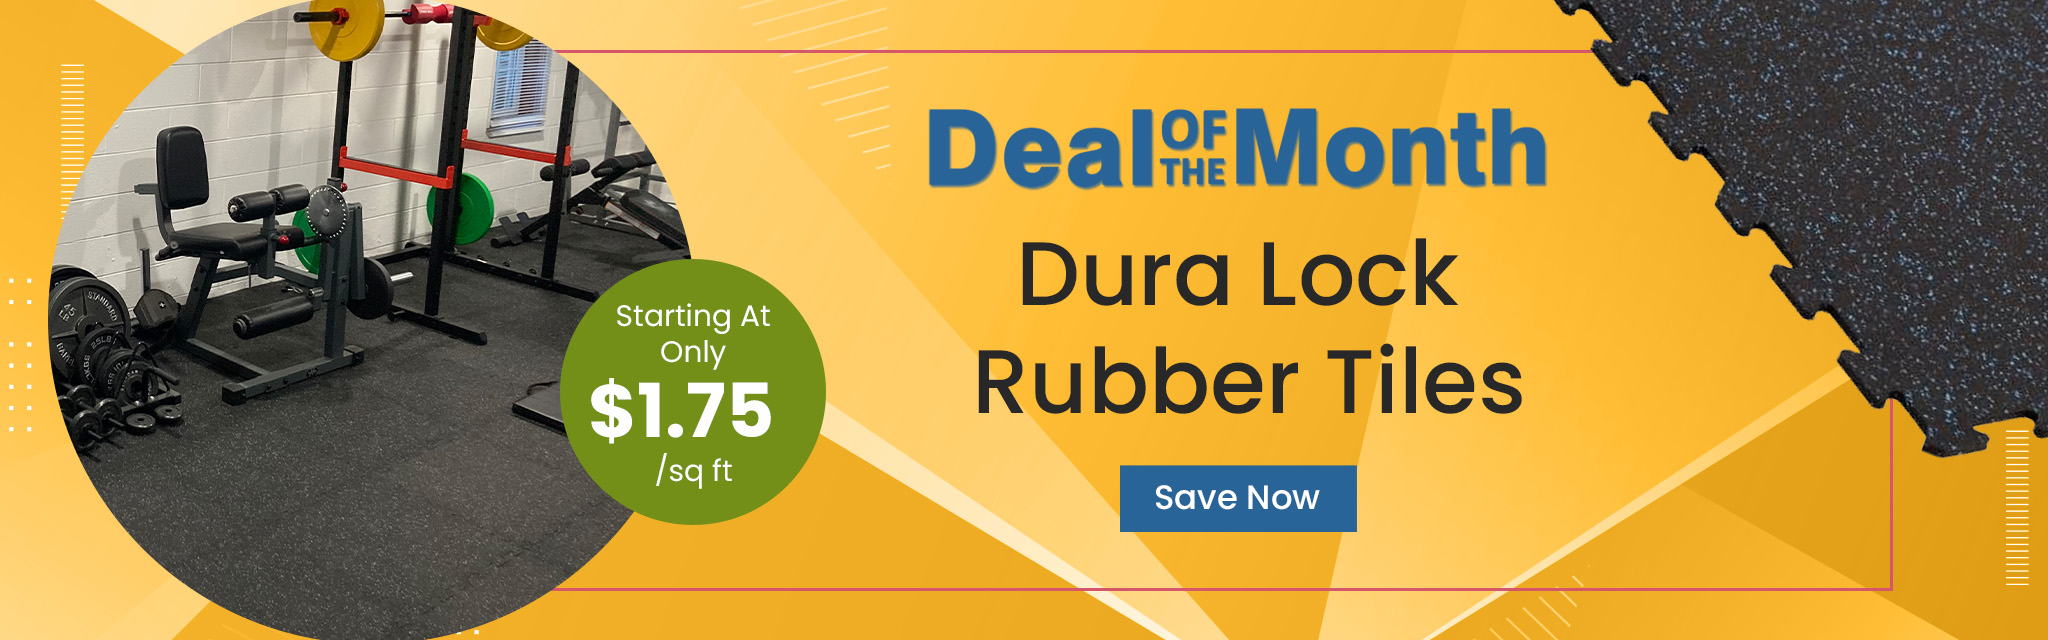 Deal Of The Month. Dura Lock Rubber Tiles.  Starting At Only $1.75 per square feet. Save Now